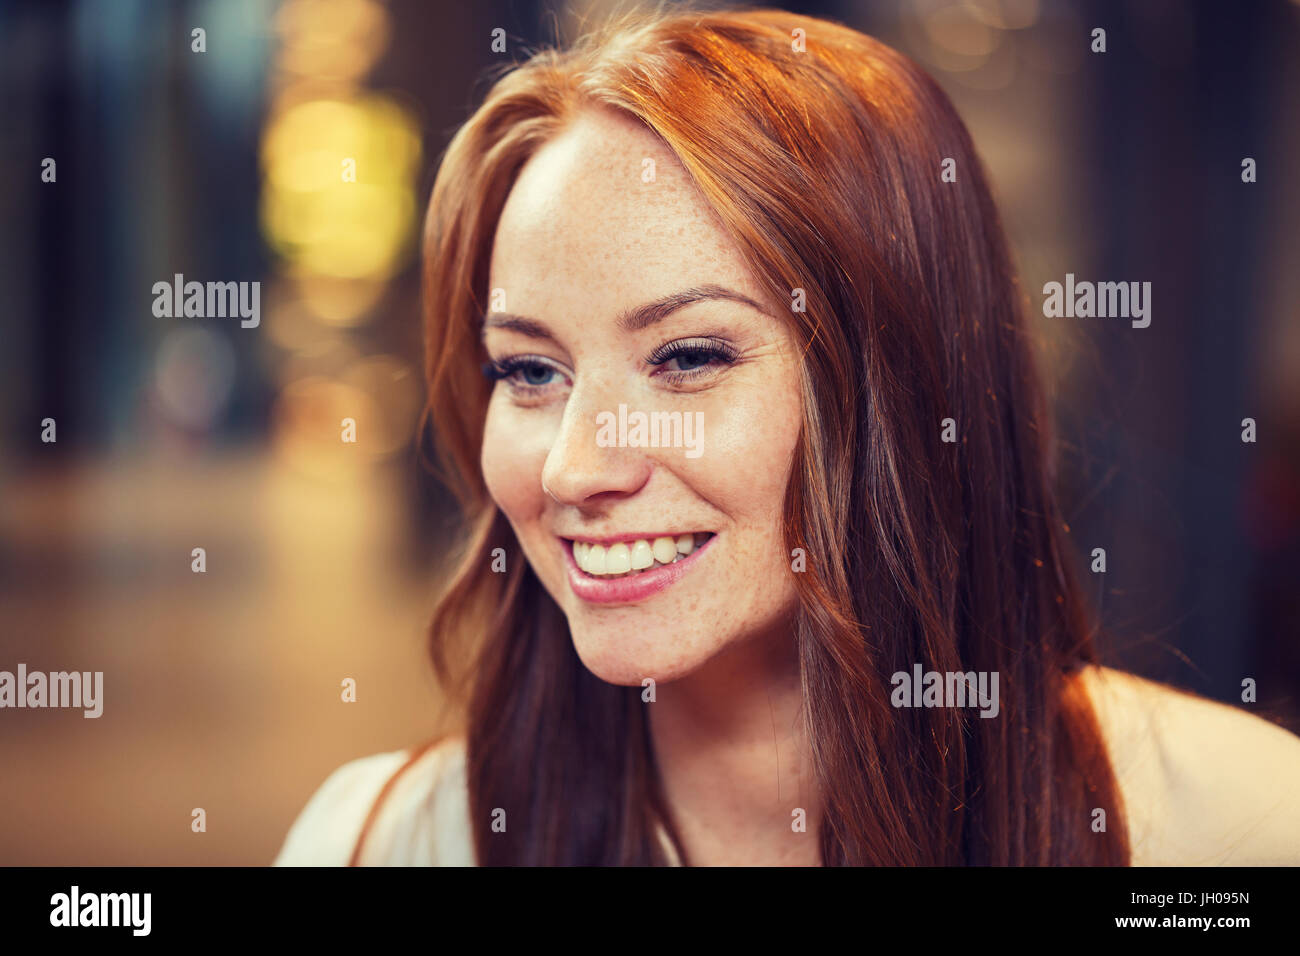 Smiling young redhead woman face Banque D'Images